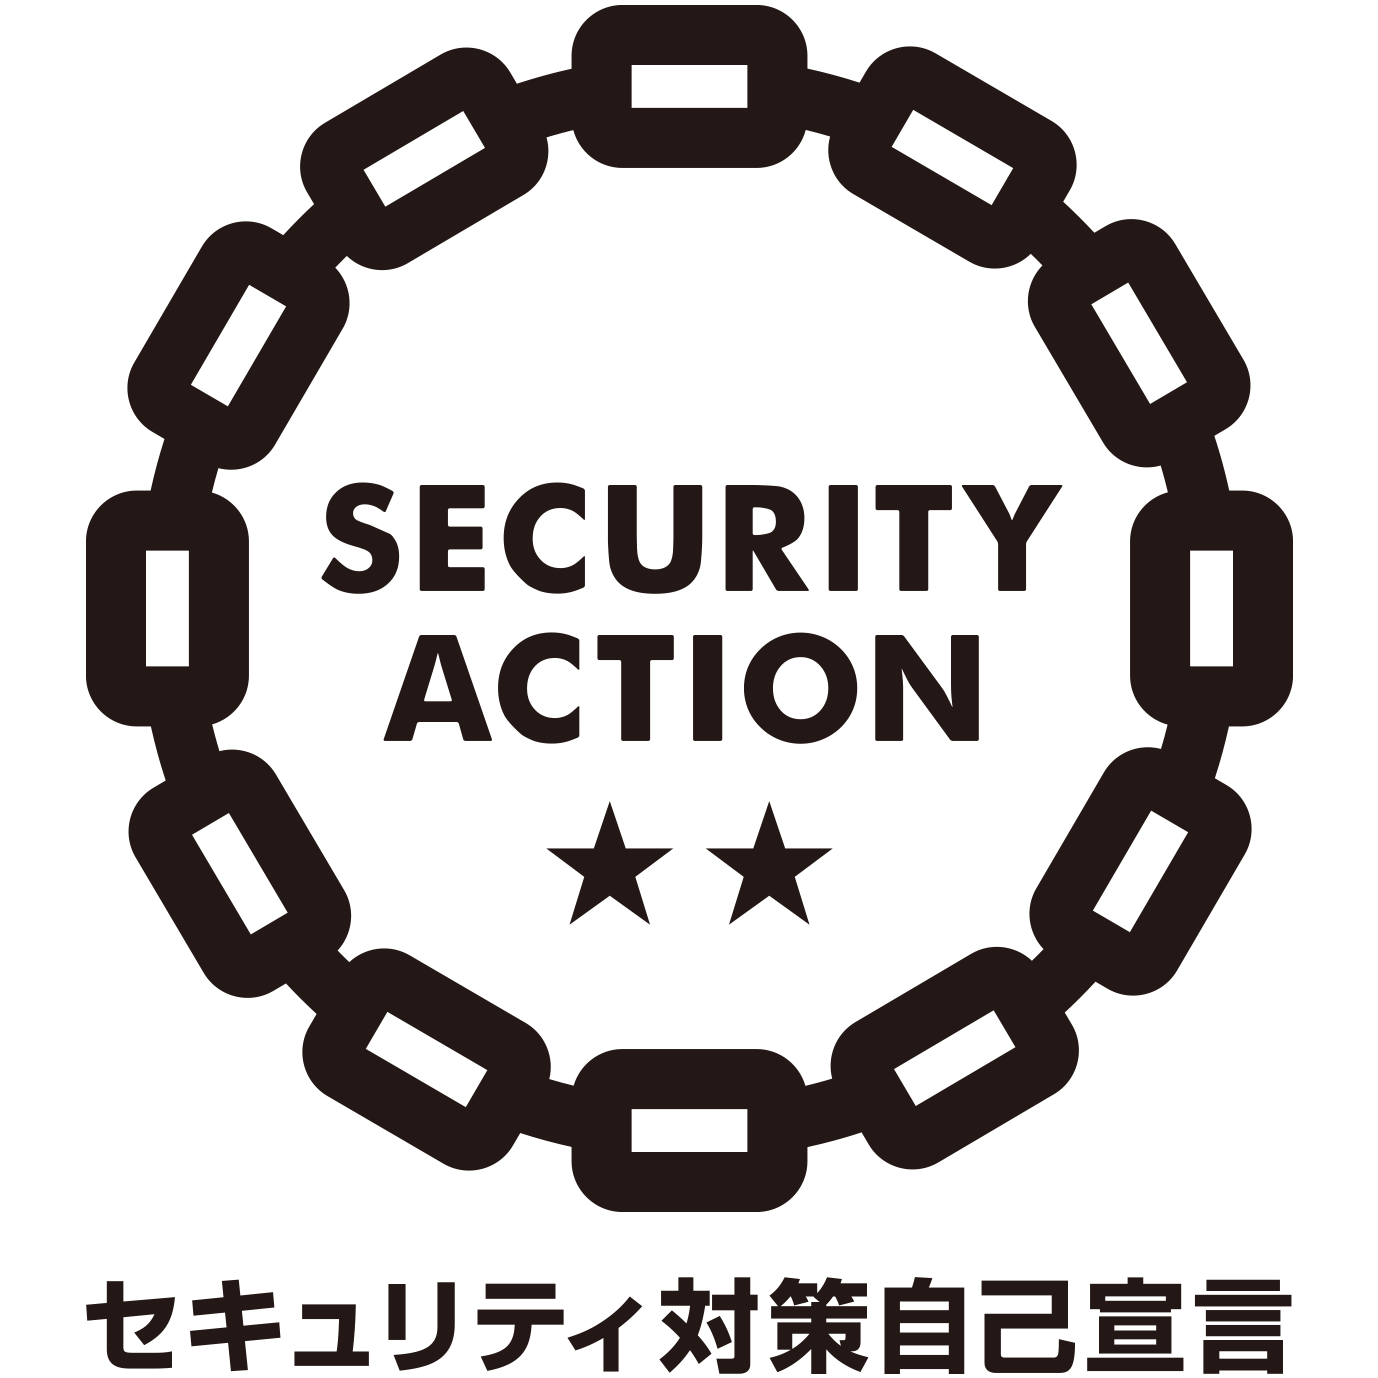 SECURITY ACTION 2つ星ロゴ